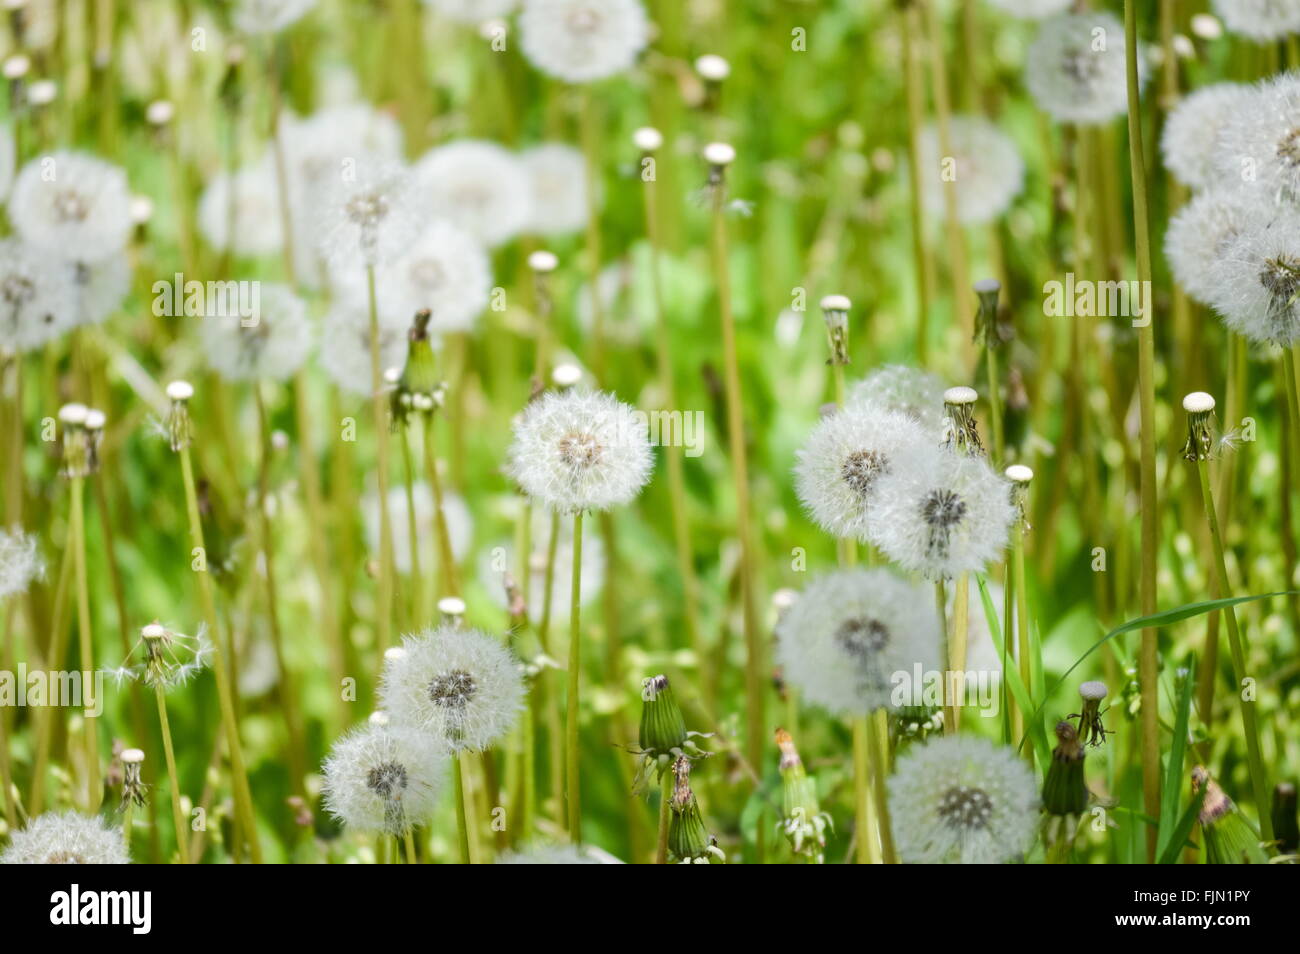 Close up of a field filled with dandelions Stock Photo